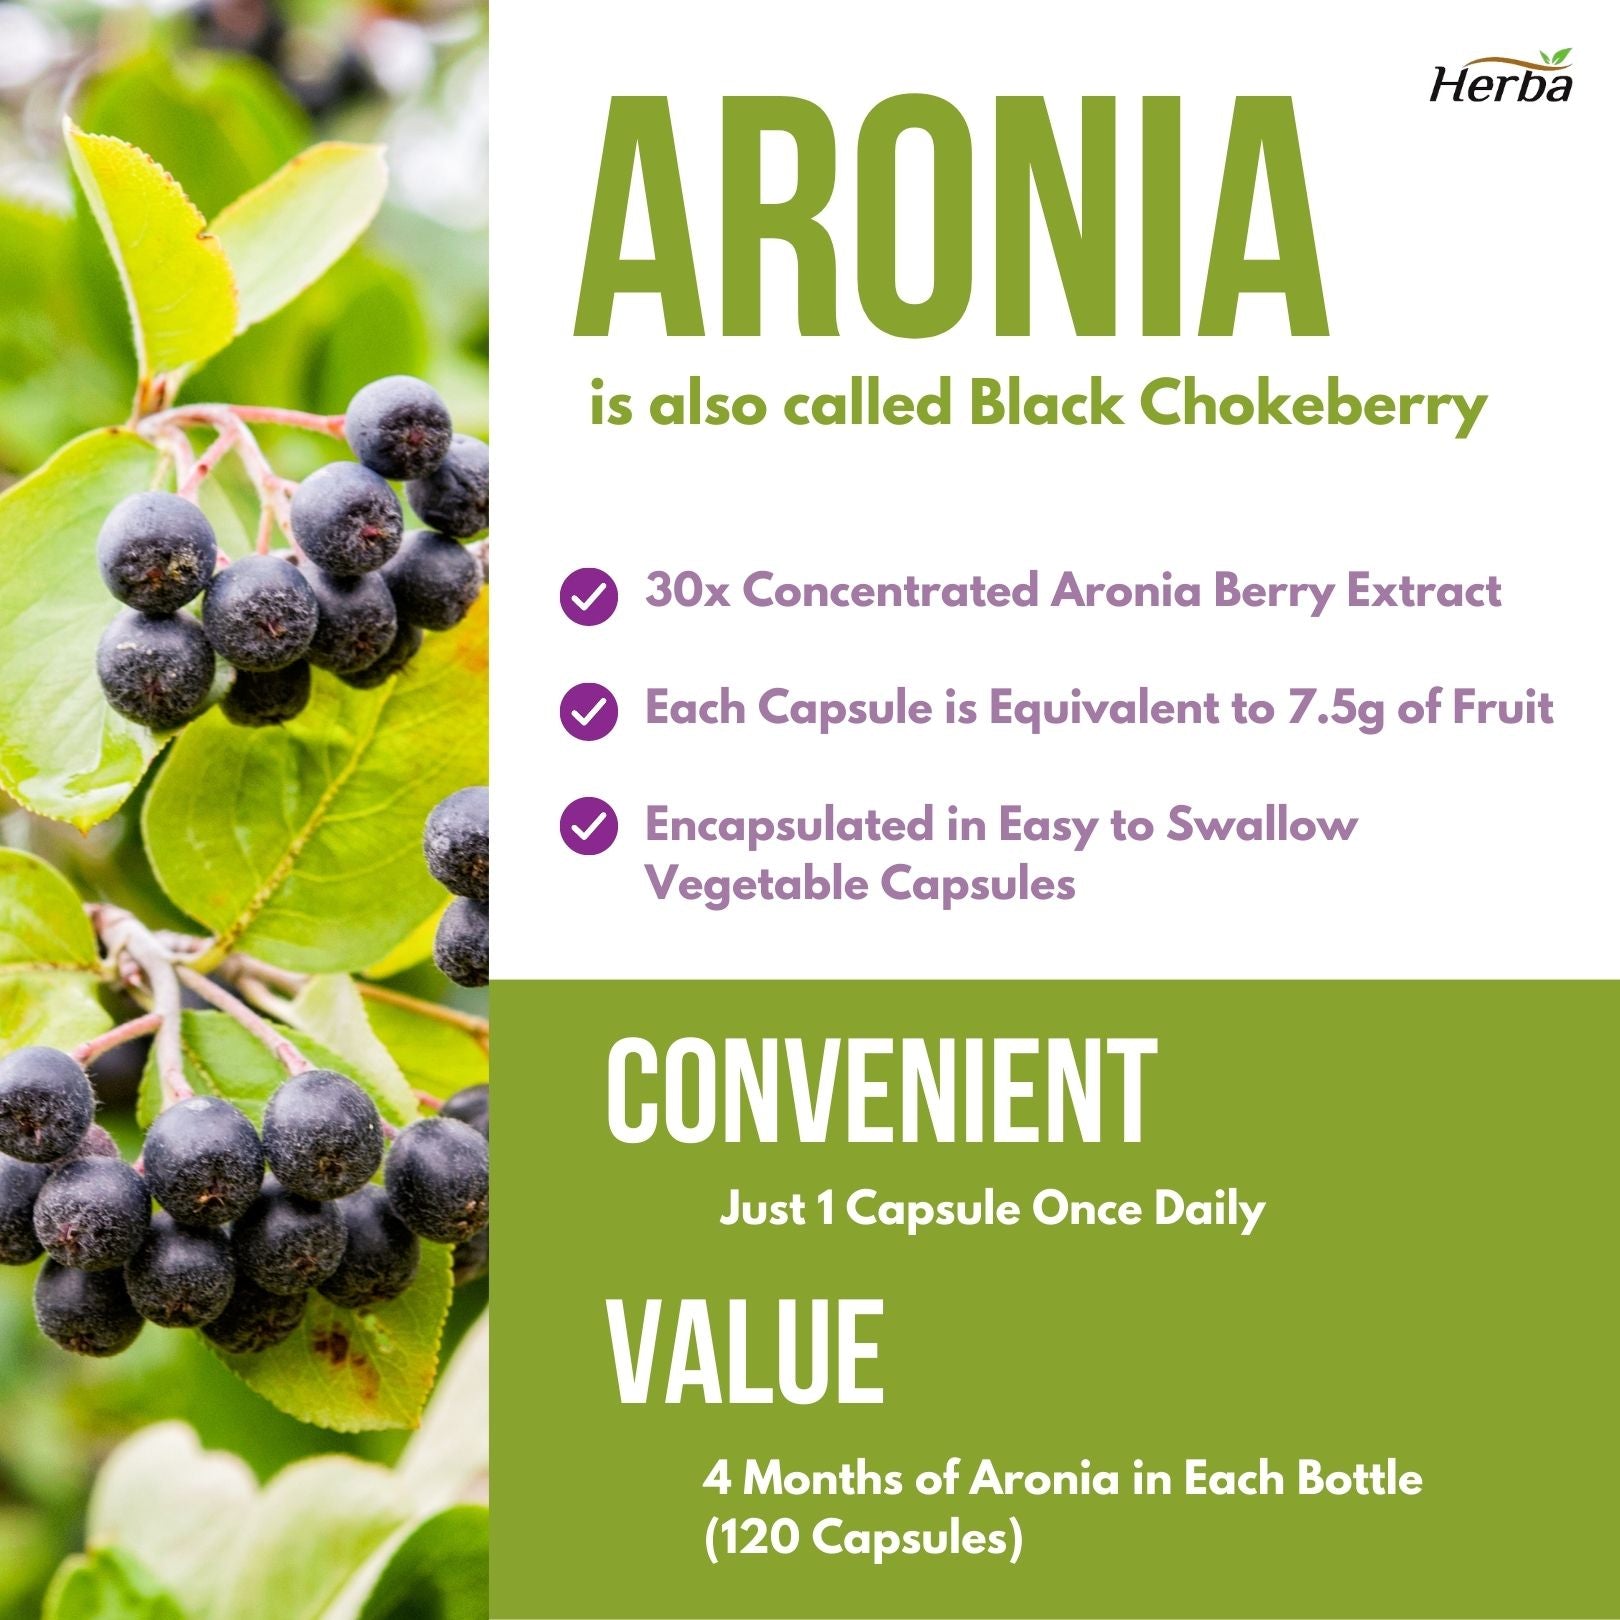 Herba Aronia Berry Extract 250mg – 120 Capsules | 7500mg Fruit Equivalent | 30:1 Aronia Extract Supplement